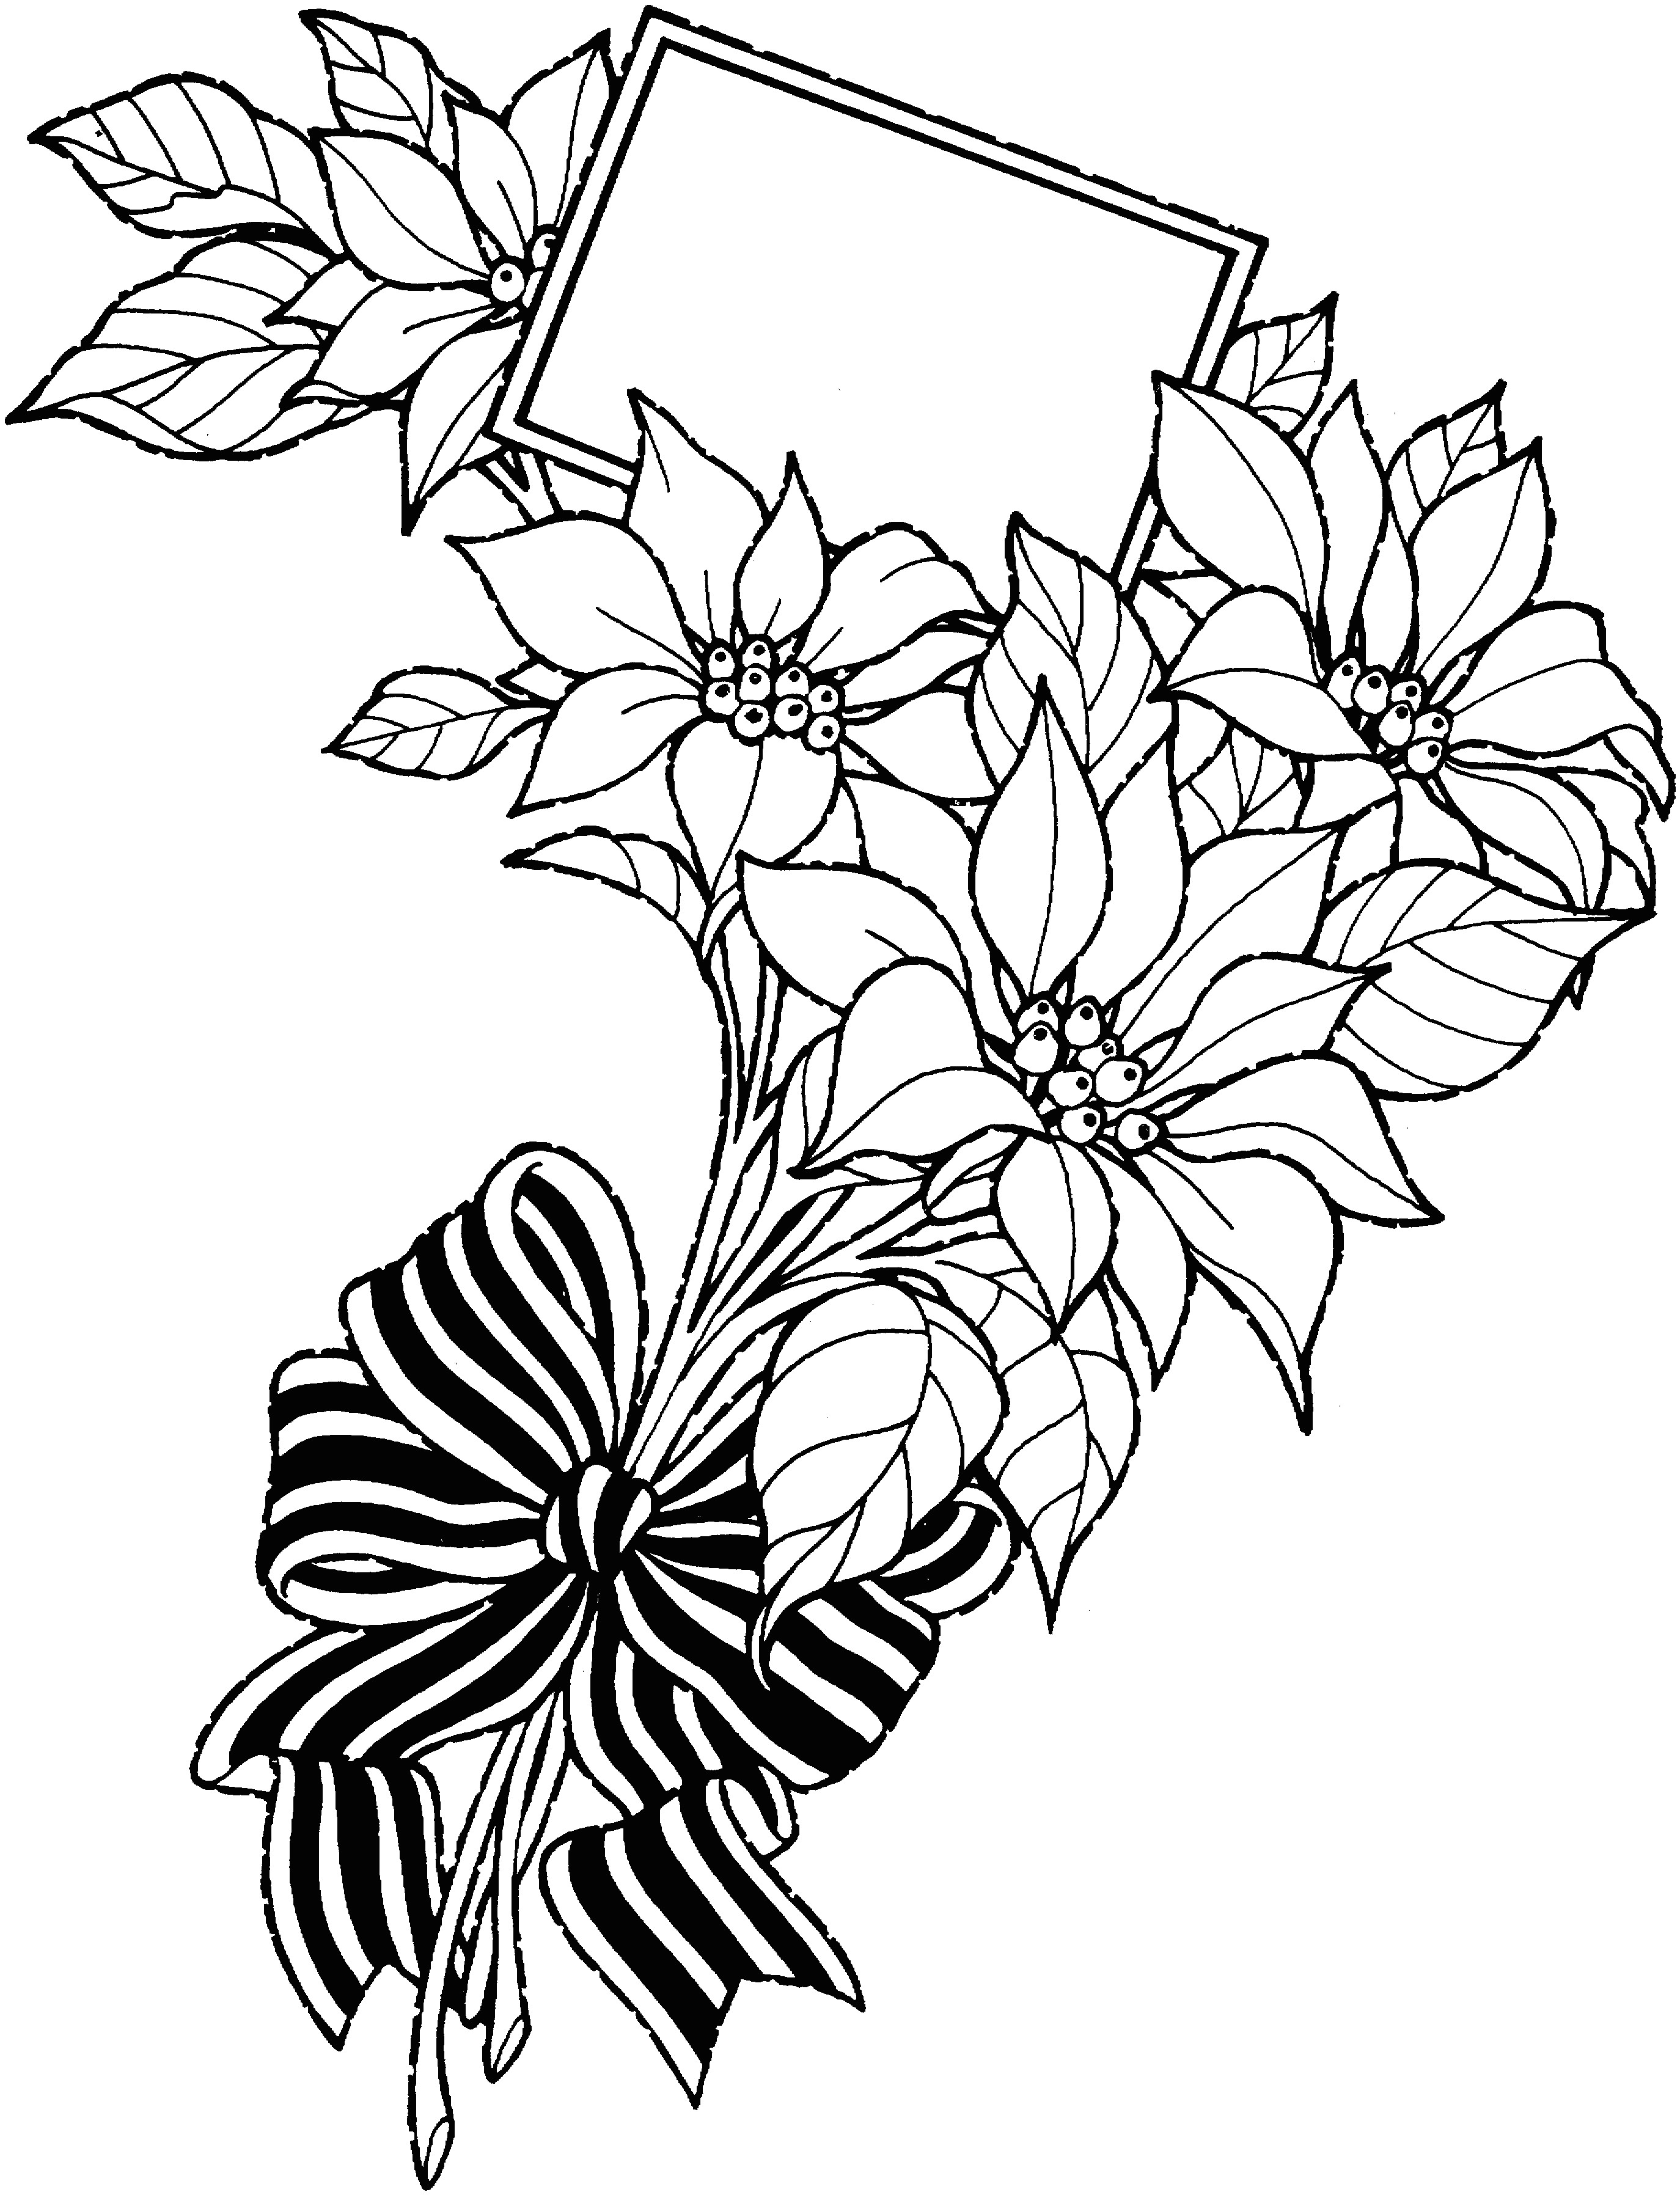 rose drawing awesome best vases flower vase coloring page pages flowers in a top i 0d